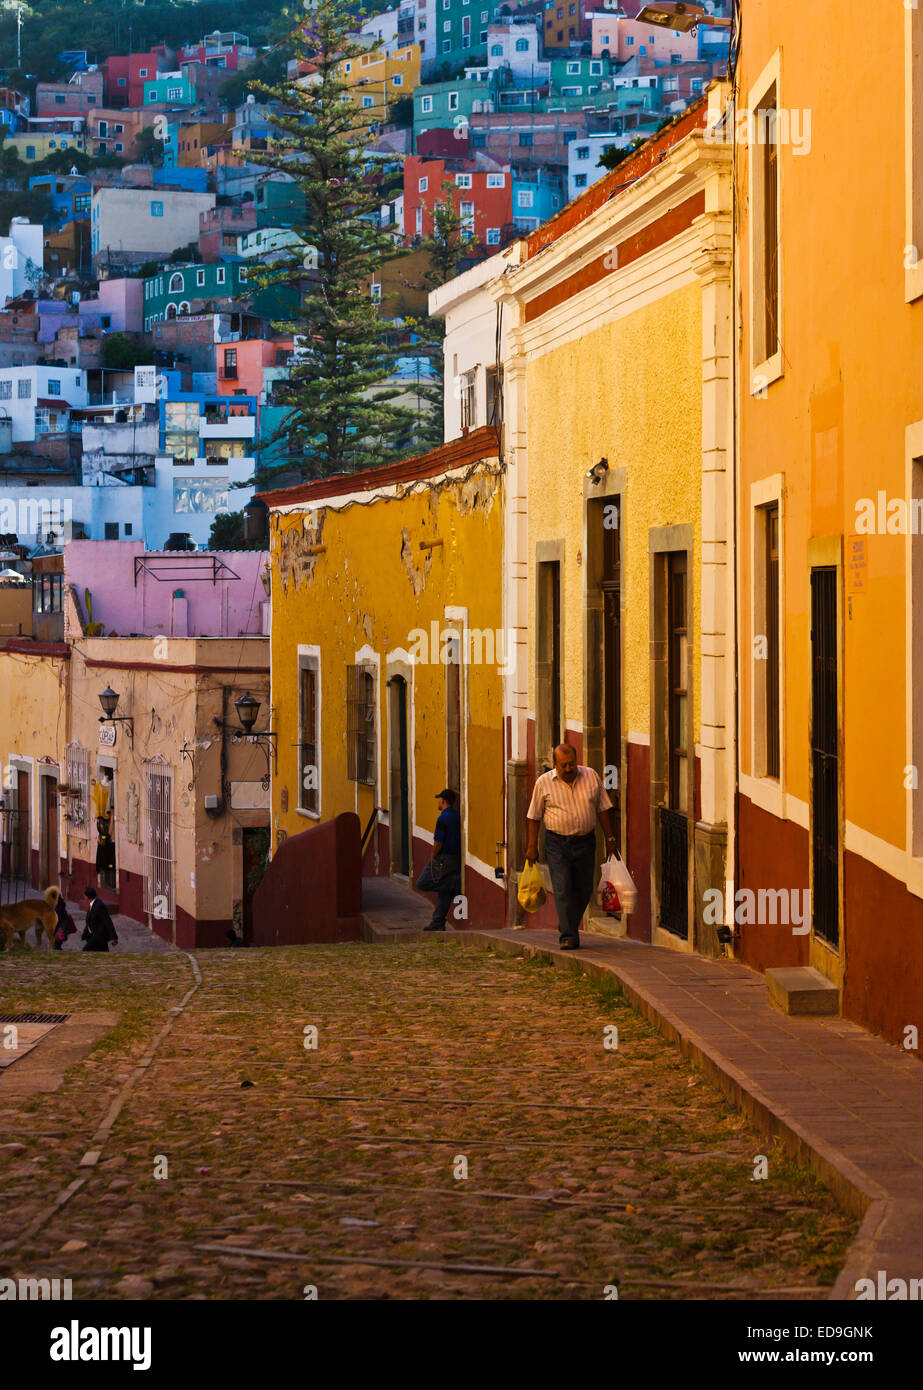 Colorful buildings in the town of GUANAJUATO, MEXICO Stock Photo